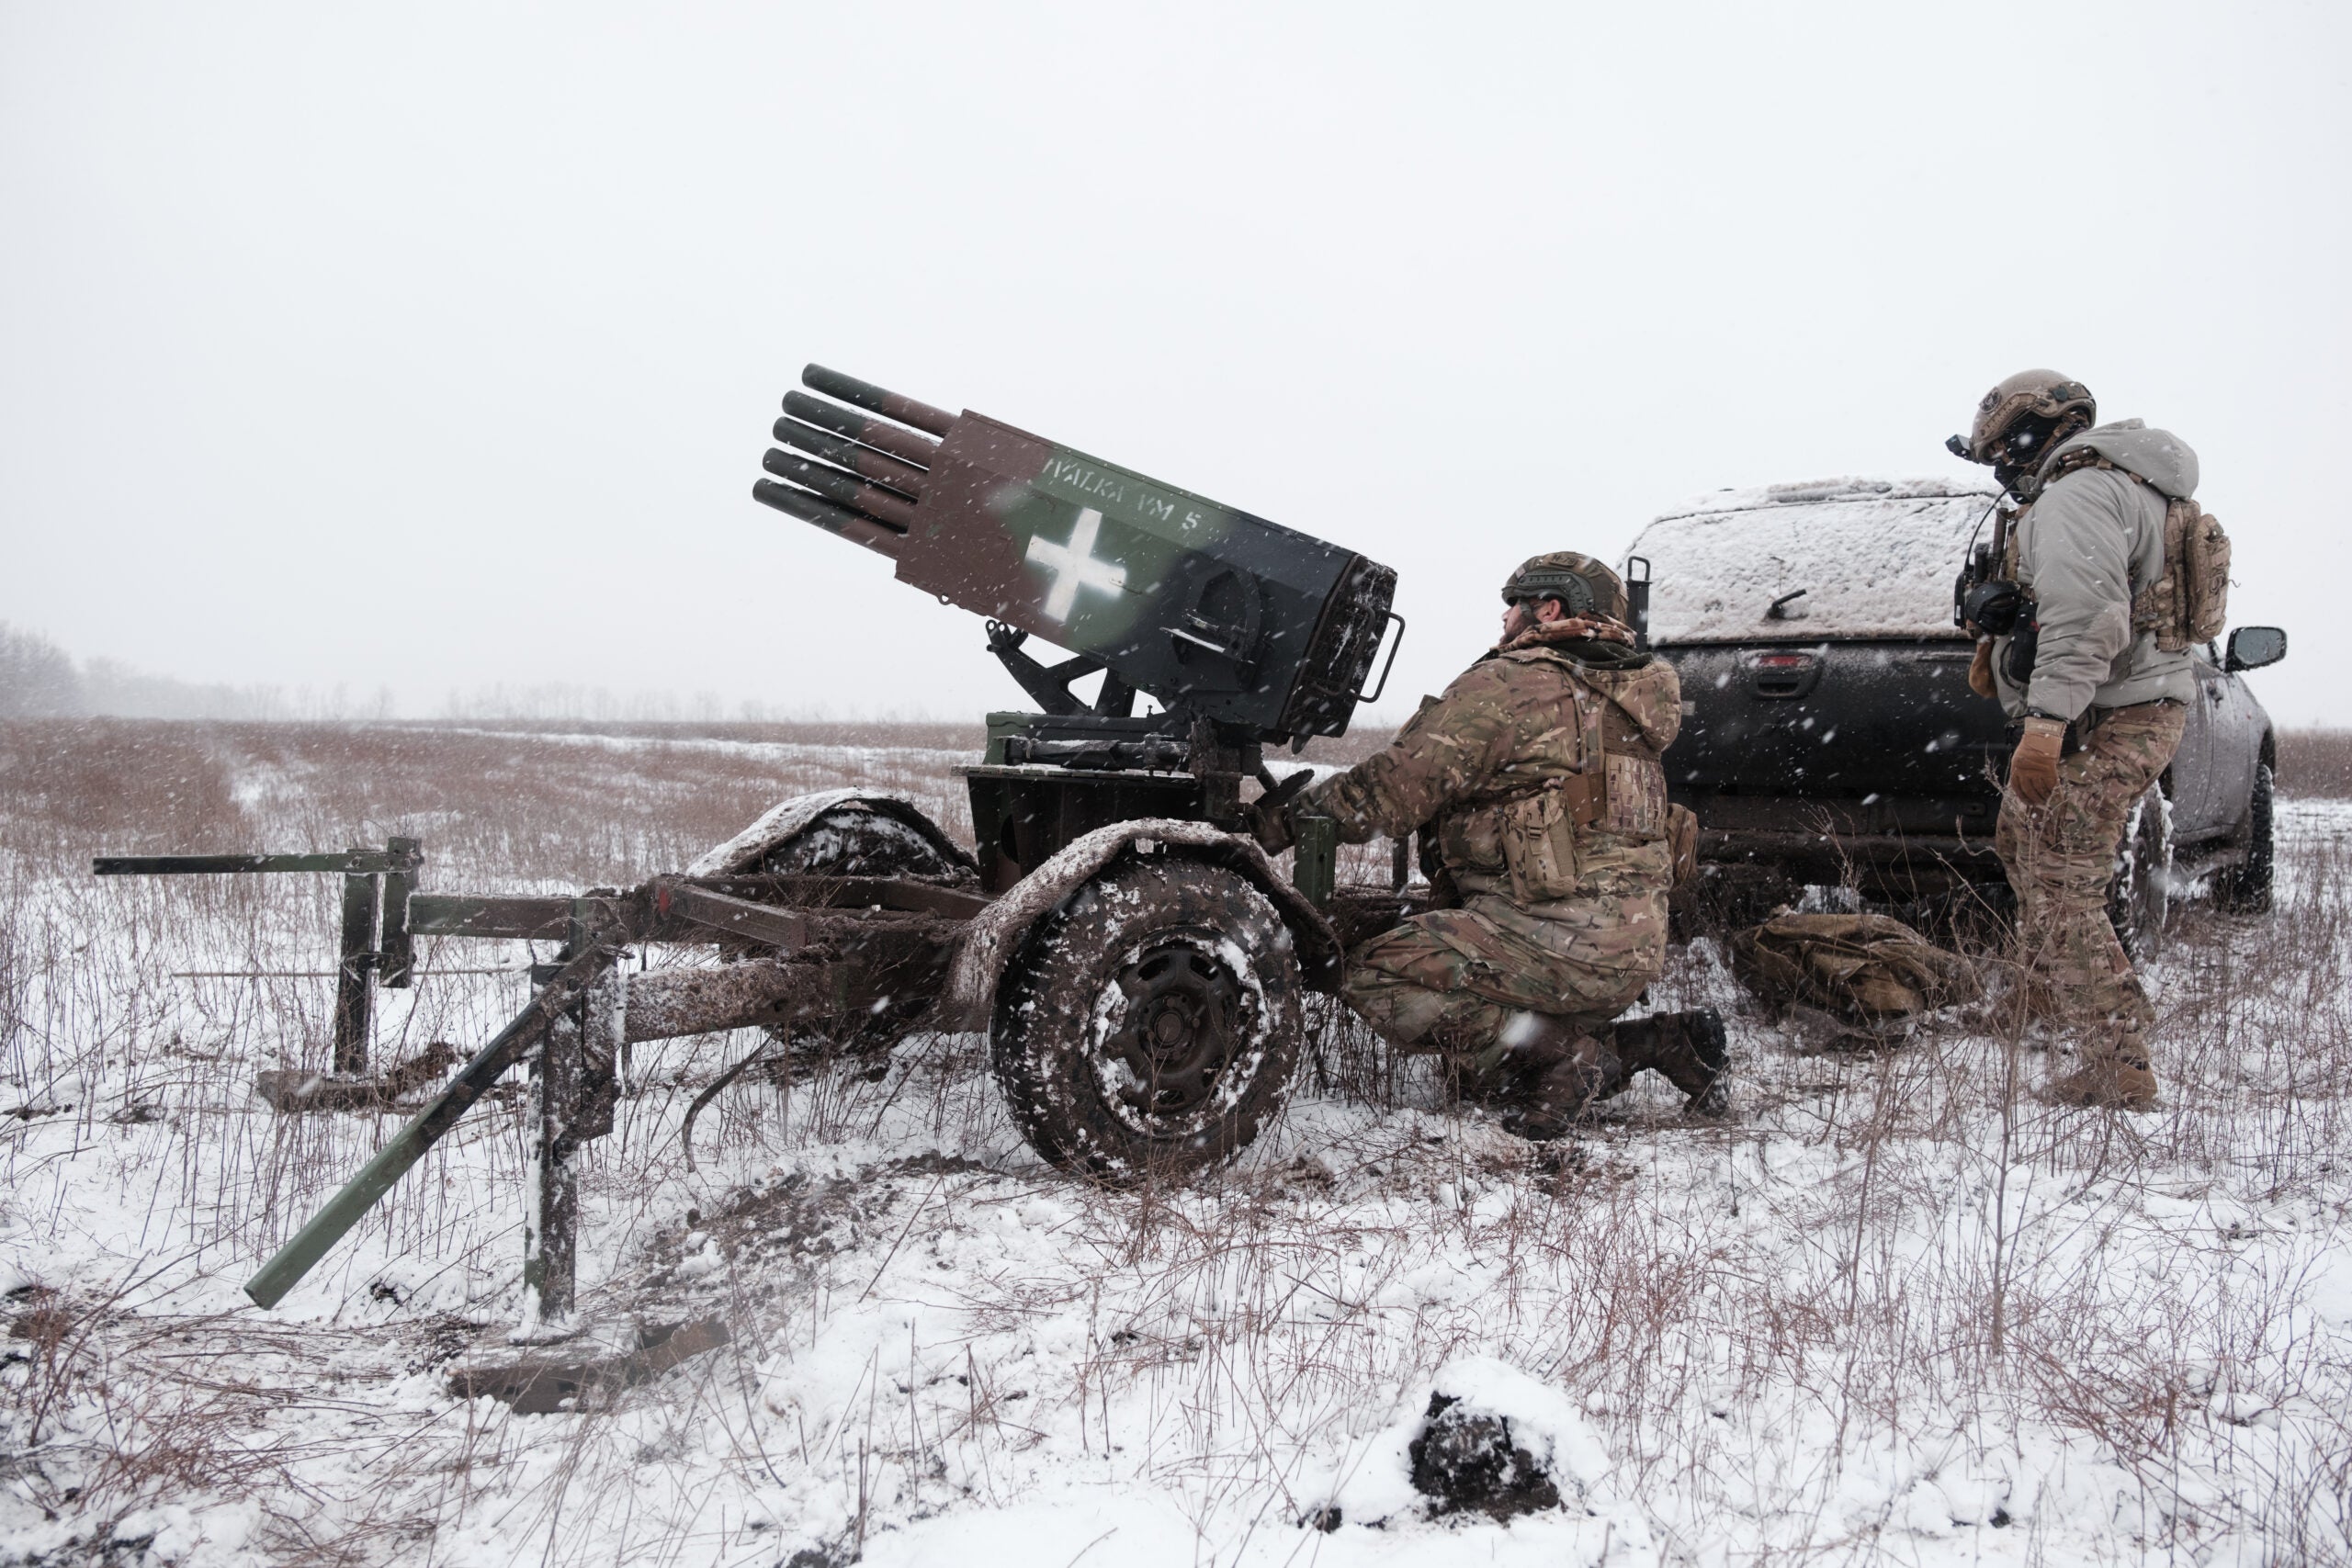 DONETSK OBLAST, UKRAINE - DECEMBER 25: Ukrainian soldiers of the 28th Mechanized Brigade prepare an improvised multiple rocket for firing on Russian position on December 25, 2023 in Donetsk Oblast, Ukraine. (Photo by Vitalii Nosach/Global Images Ukraine via Getty Images)